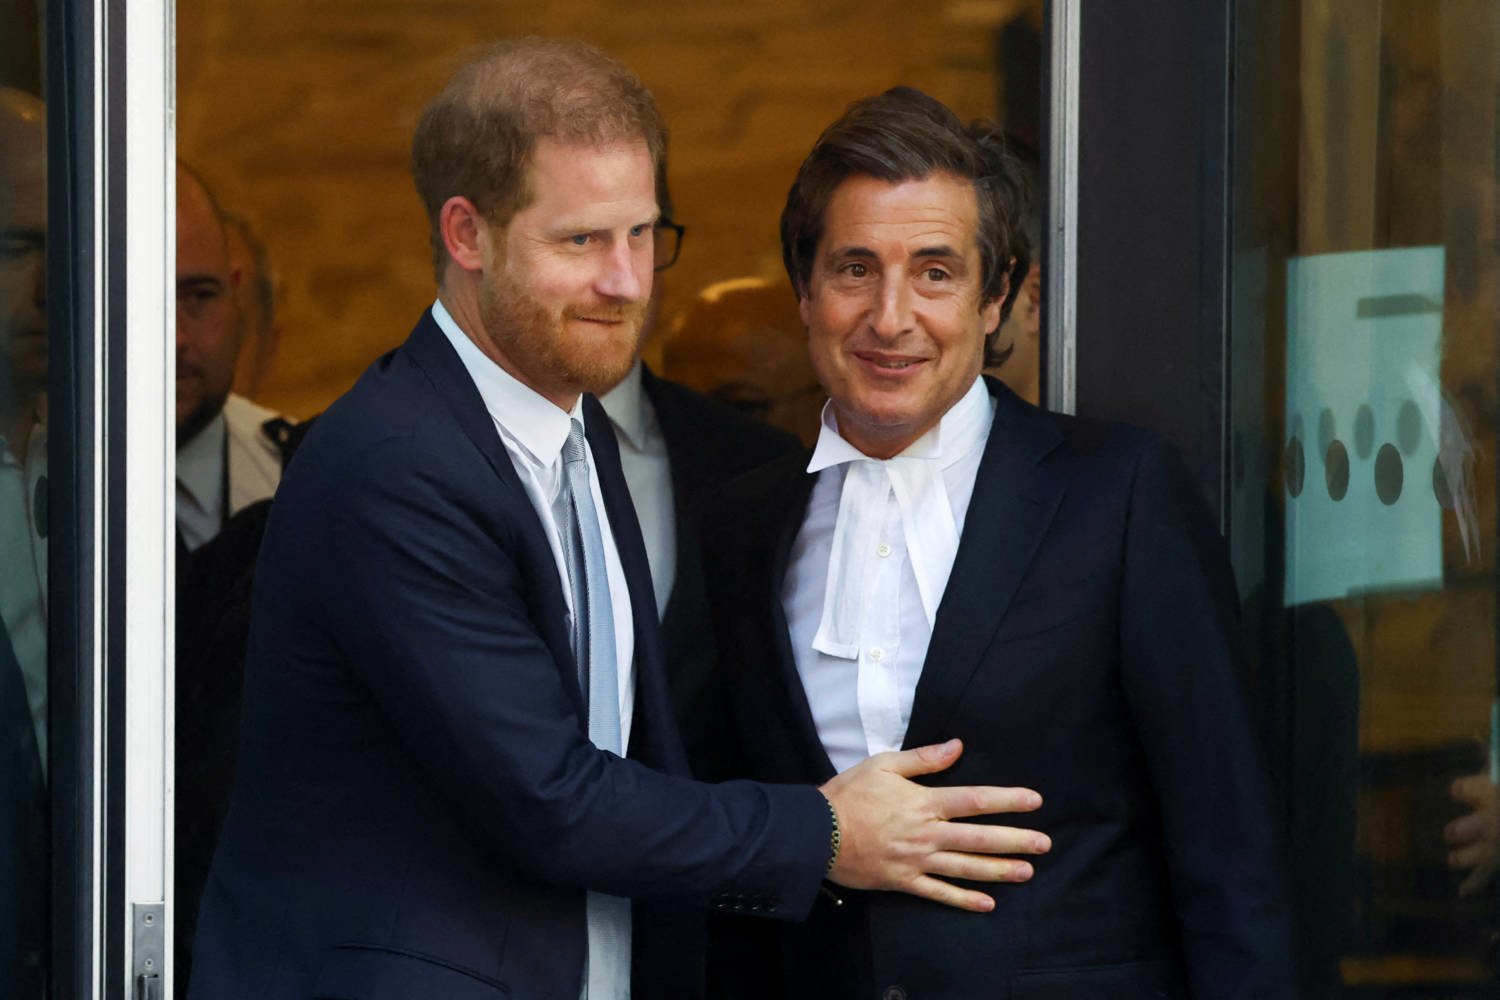 Prince Harry vows to see press mission 'to the end', berates Piers Morgan